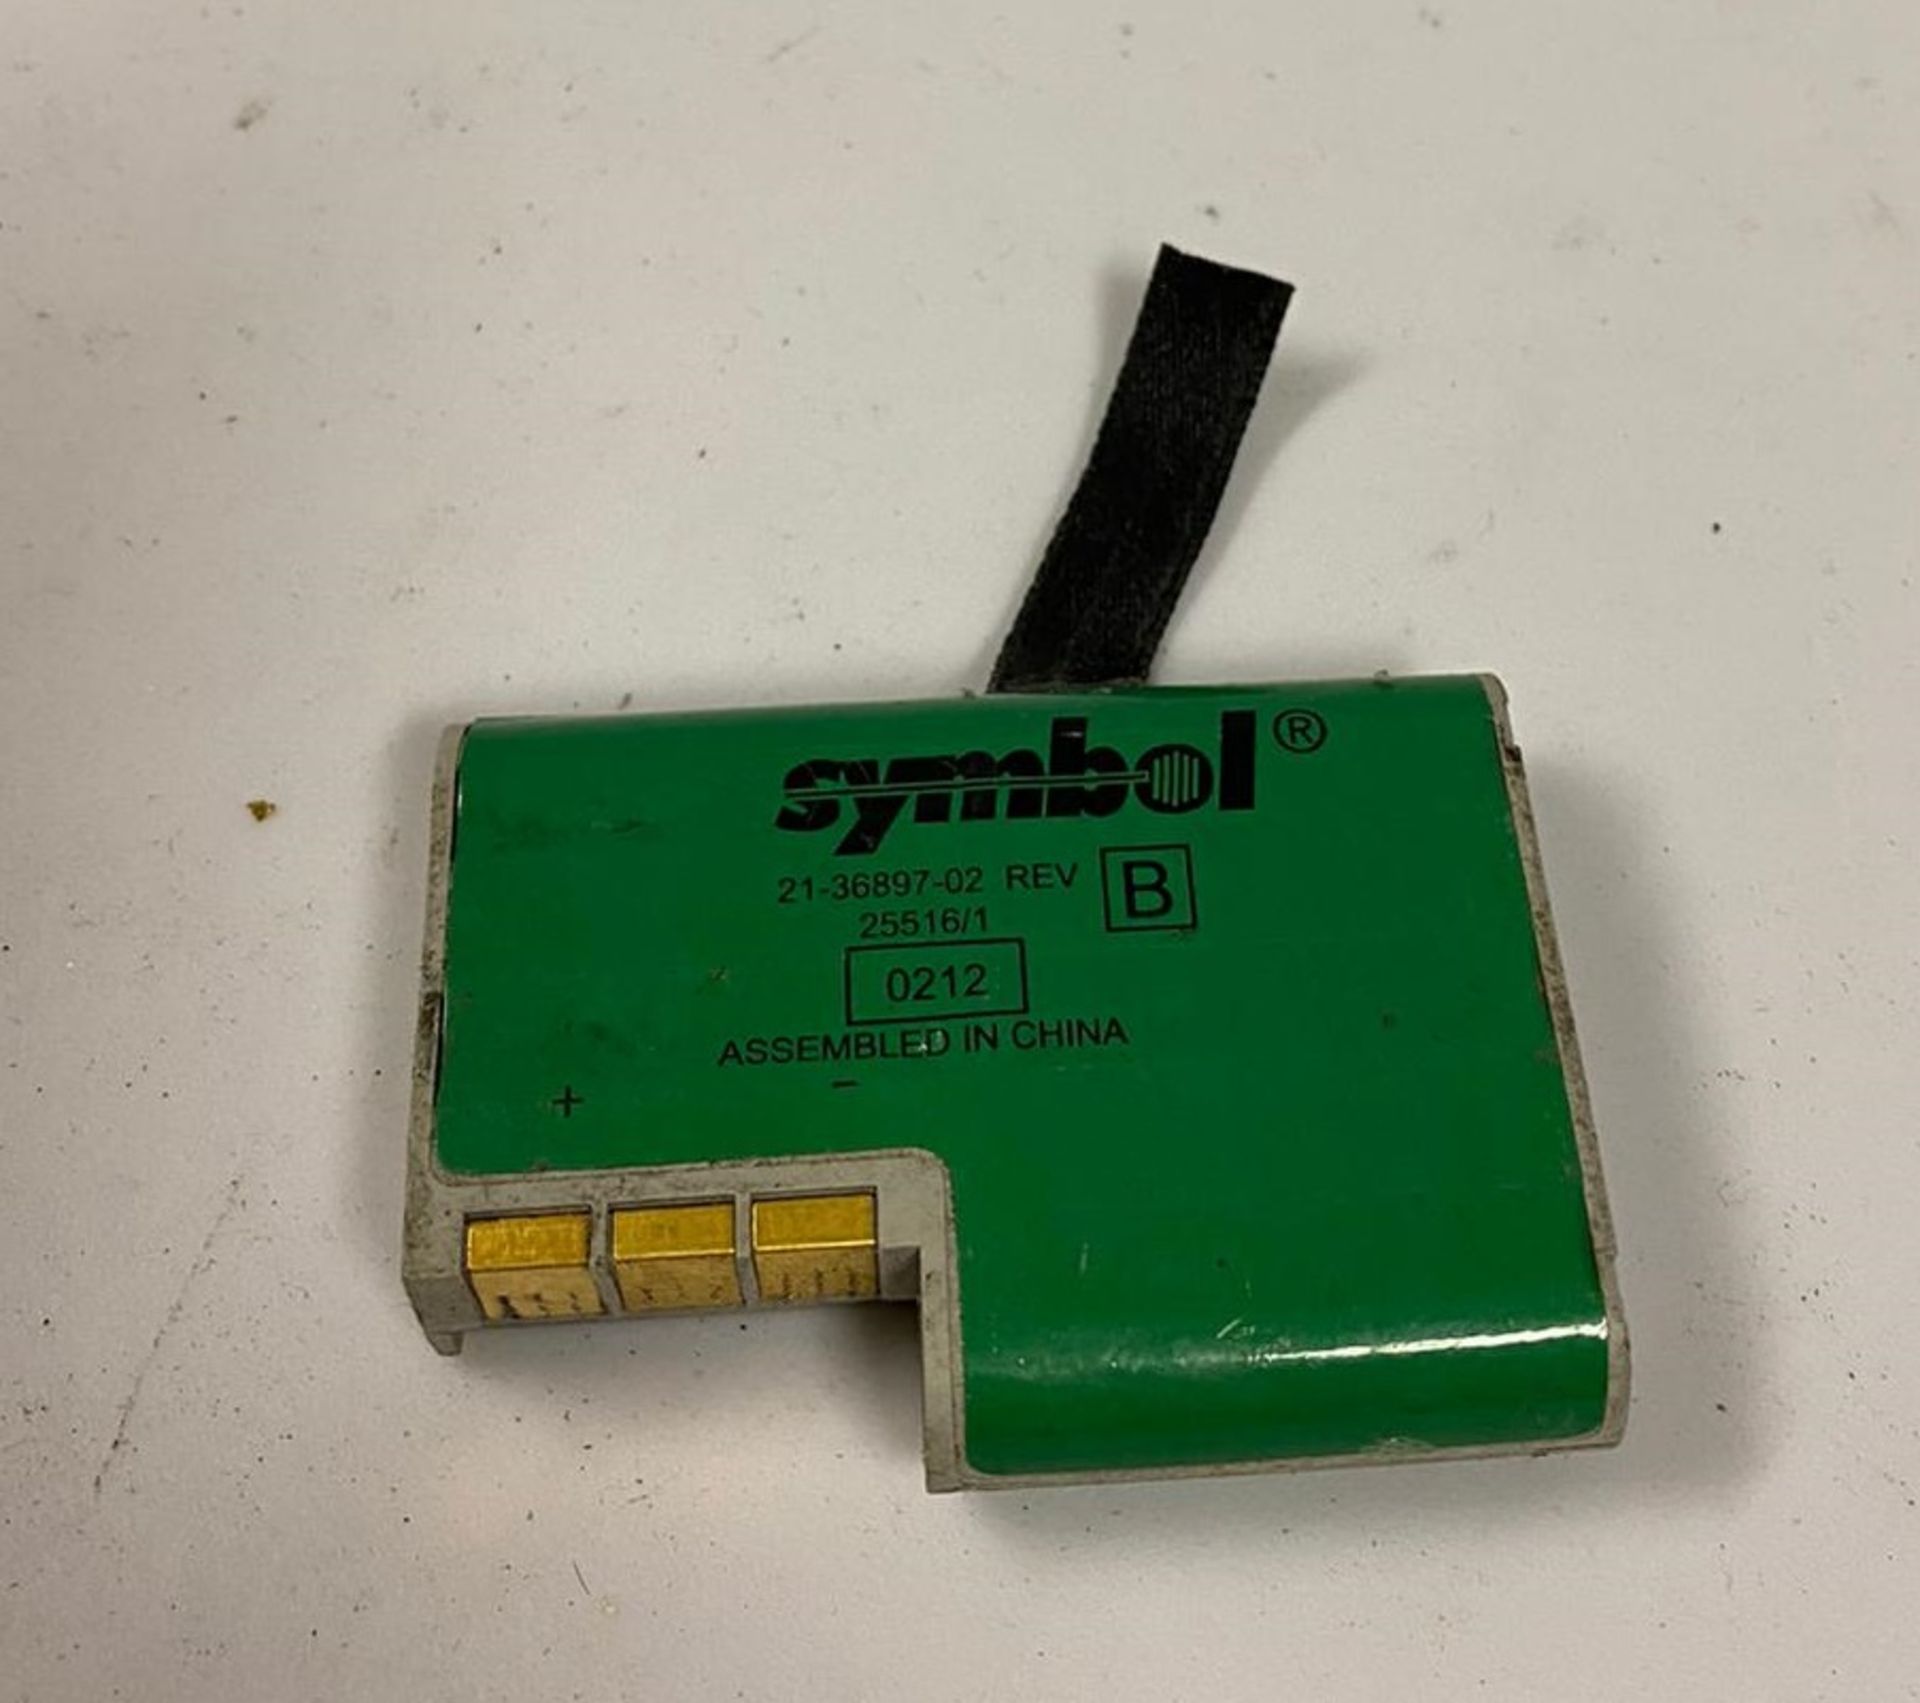 10 x Symbol 21-36897-02 Rechargeable 6.0V Batteries - Used Condition - Location: Altrincham WA14 - - Image 3 of 5